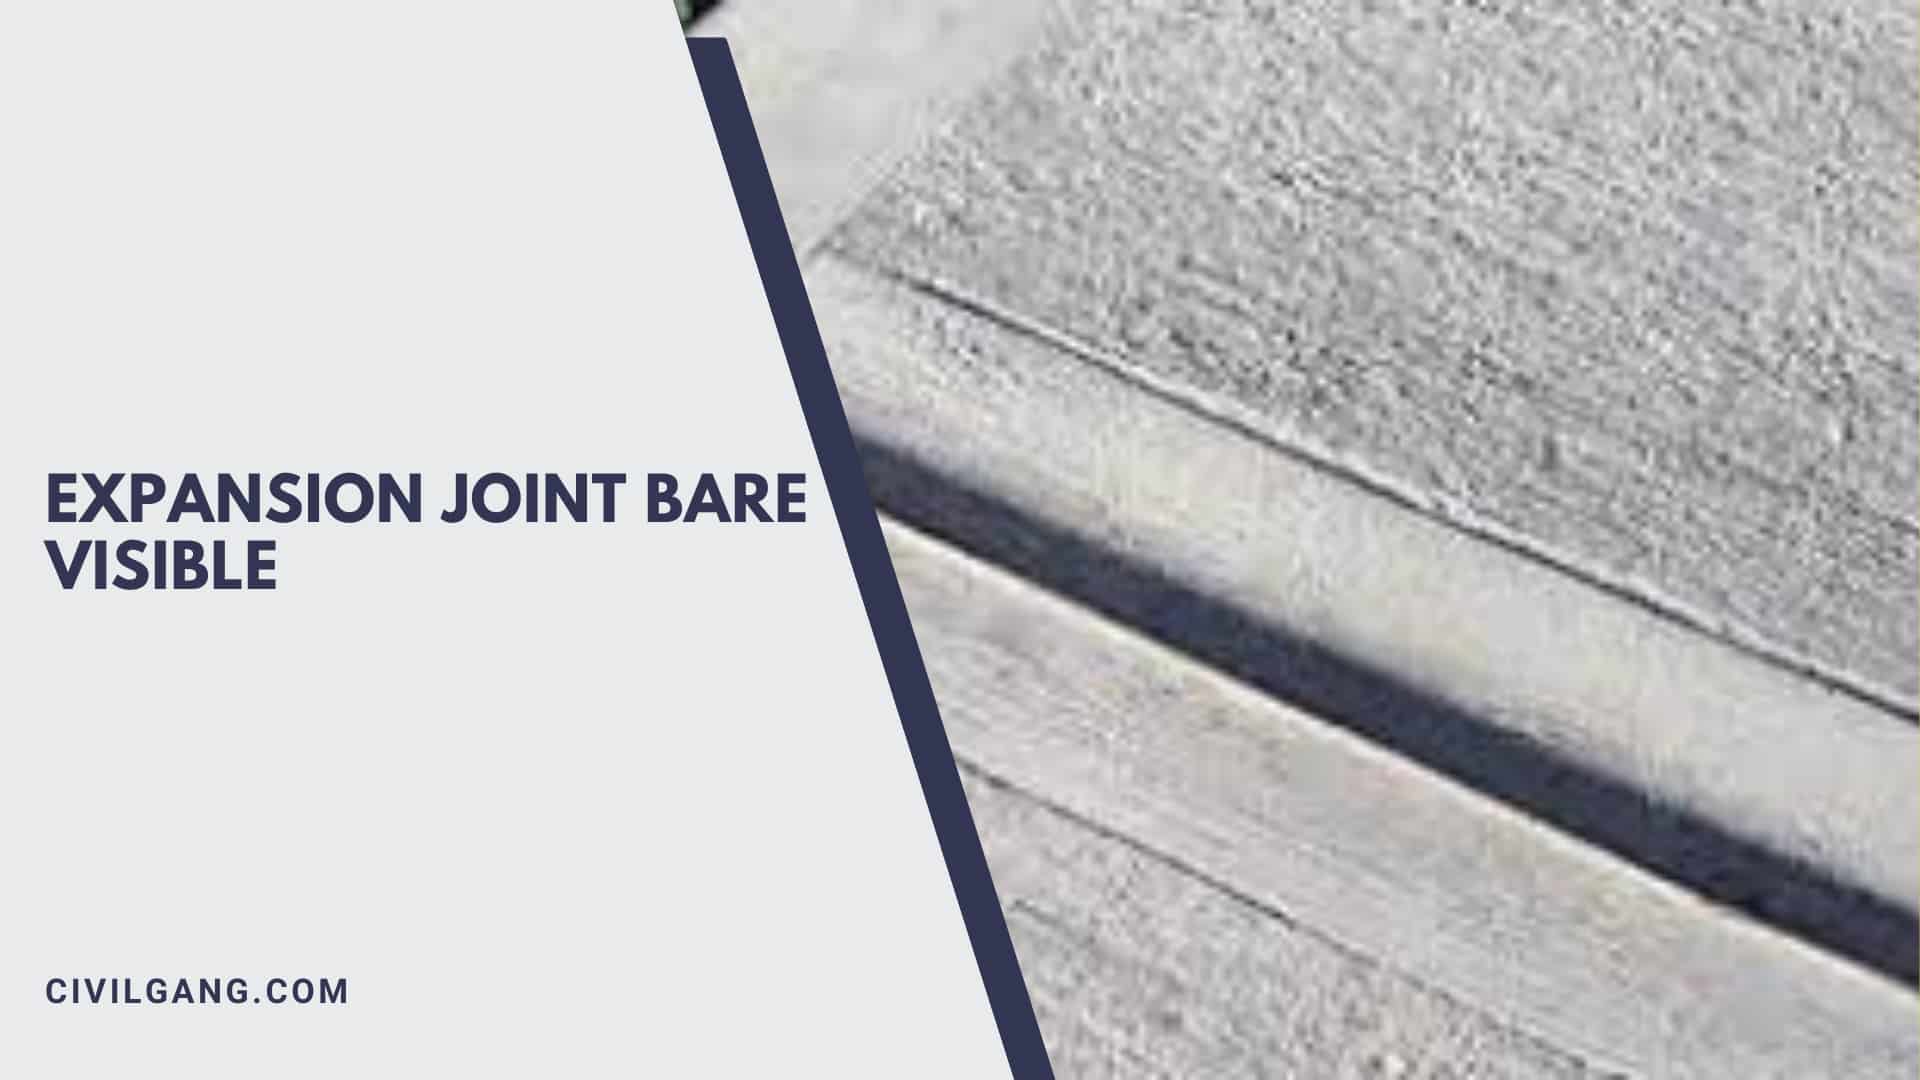 Expansion Joint Bare Visible